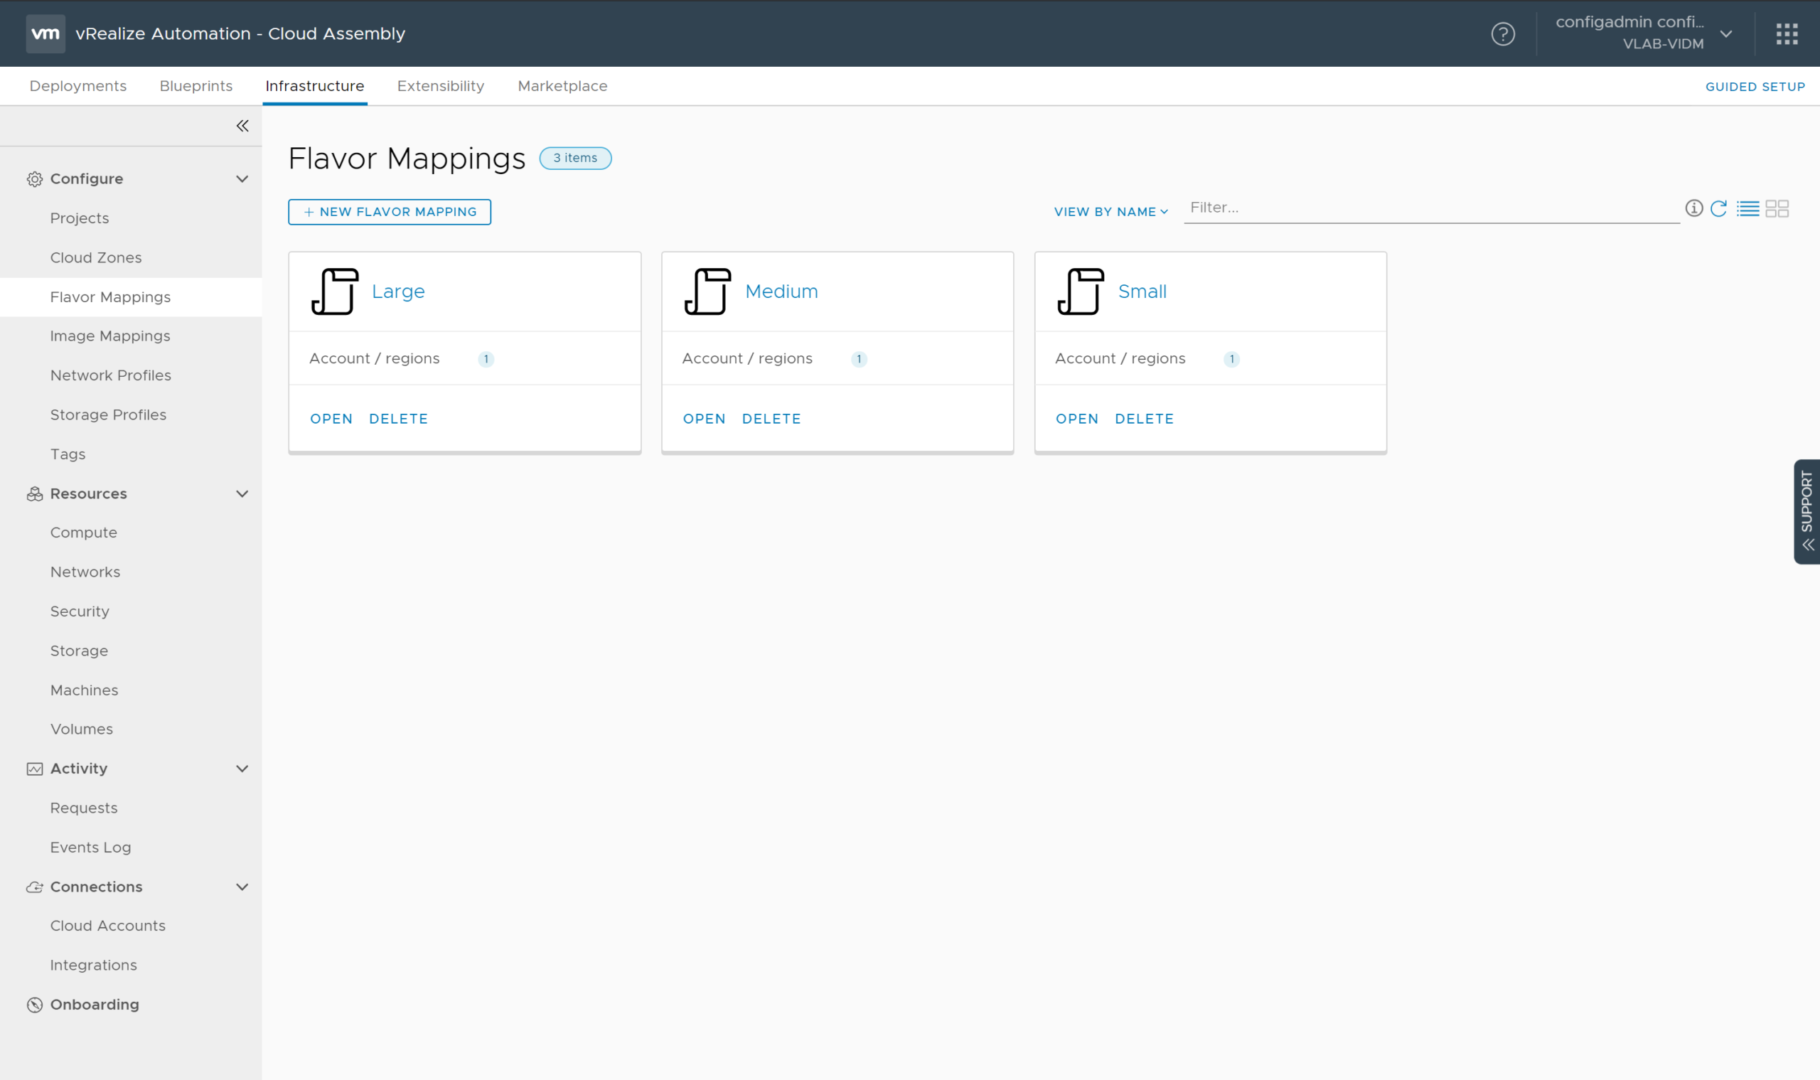 vRealize Automation 8.0 - Cloud Assembly - Flavor Mappings - With 3 Flavors Defined